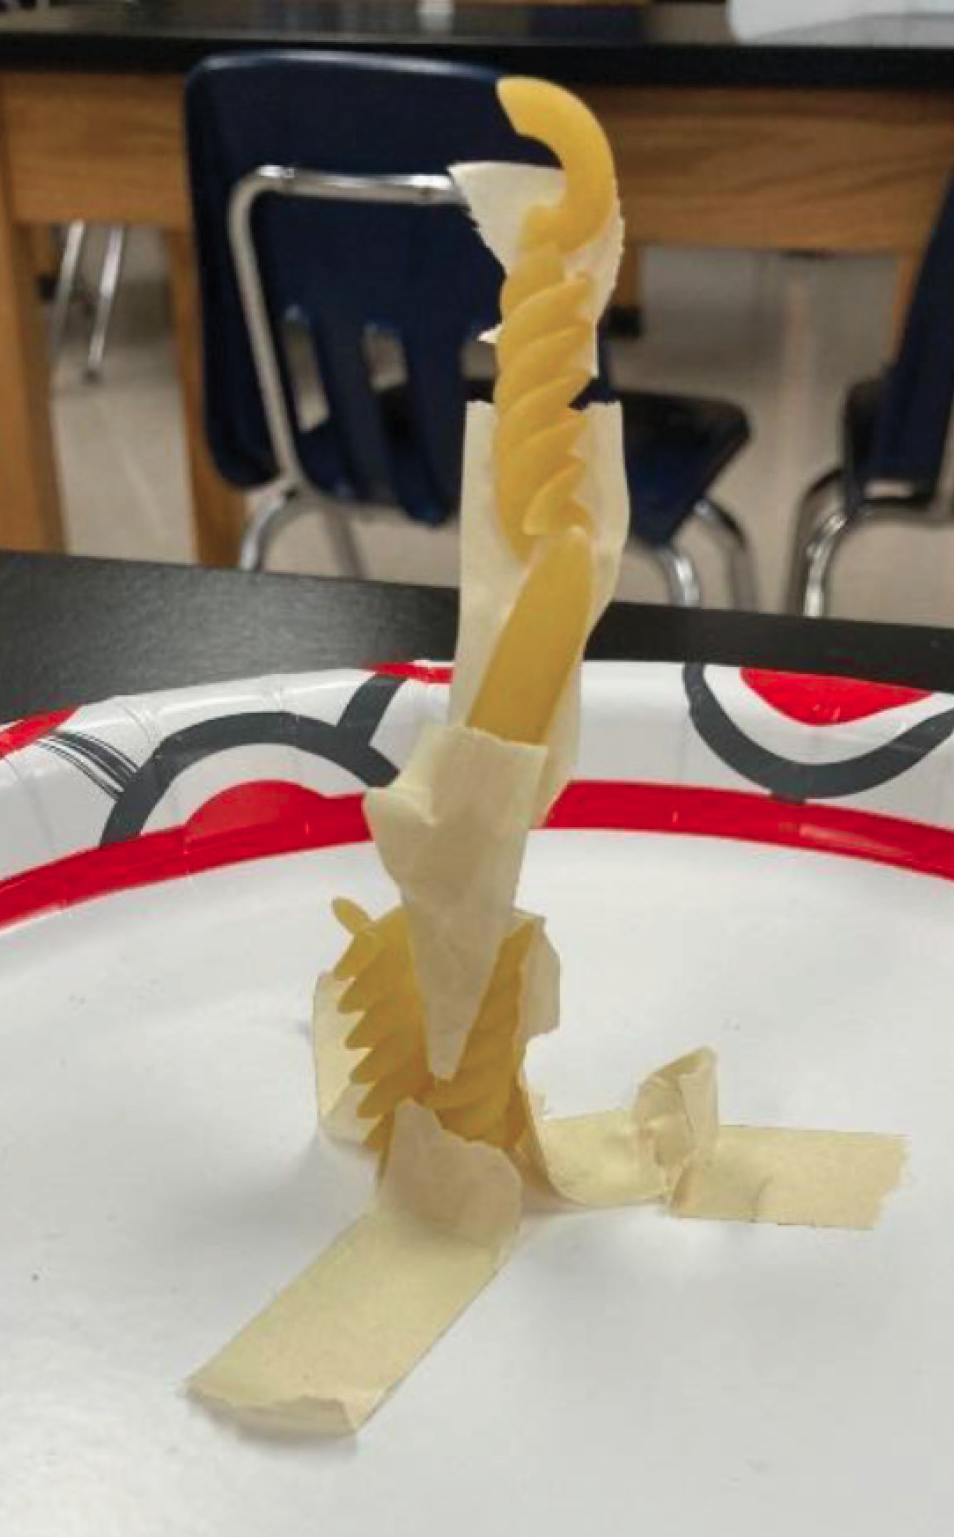 A sample tower constructed of pasta, avoiding the handling of materials by multiple students. 